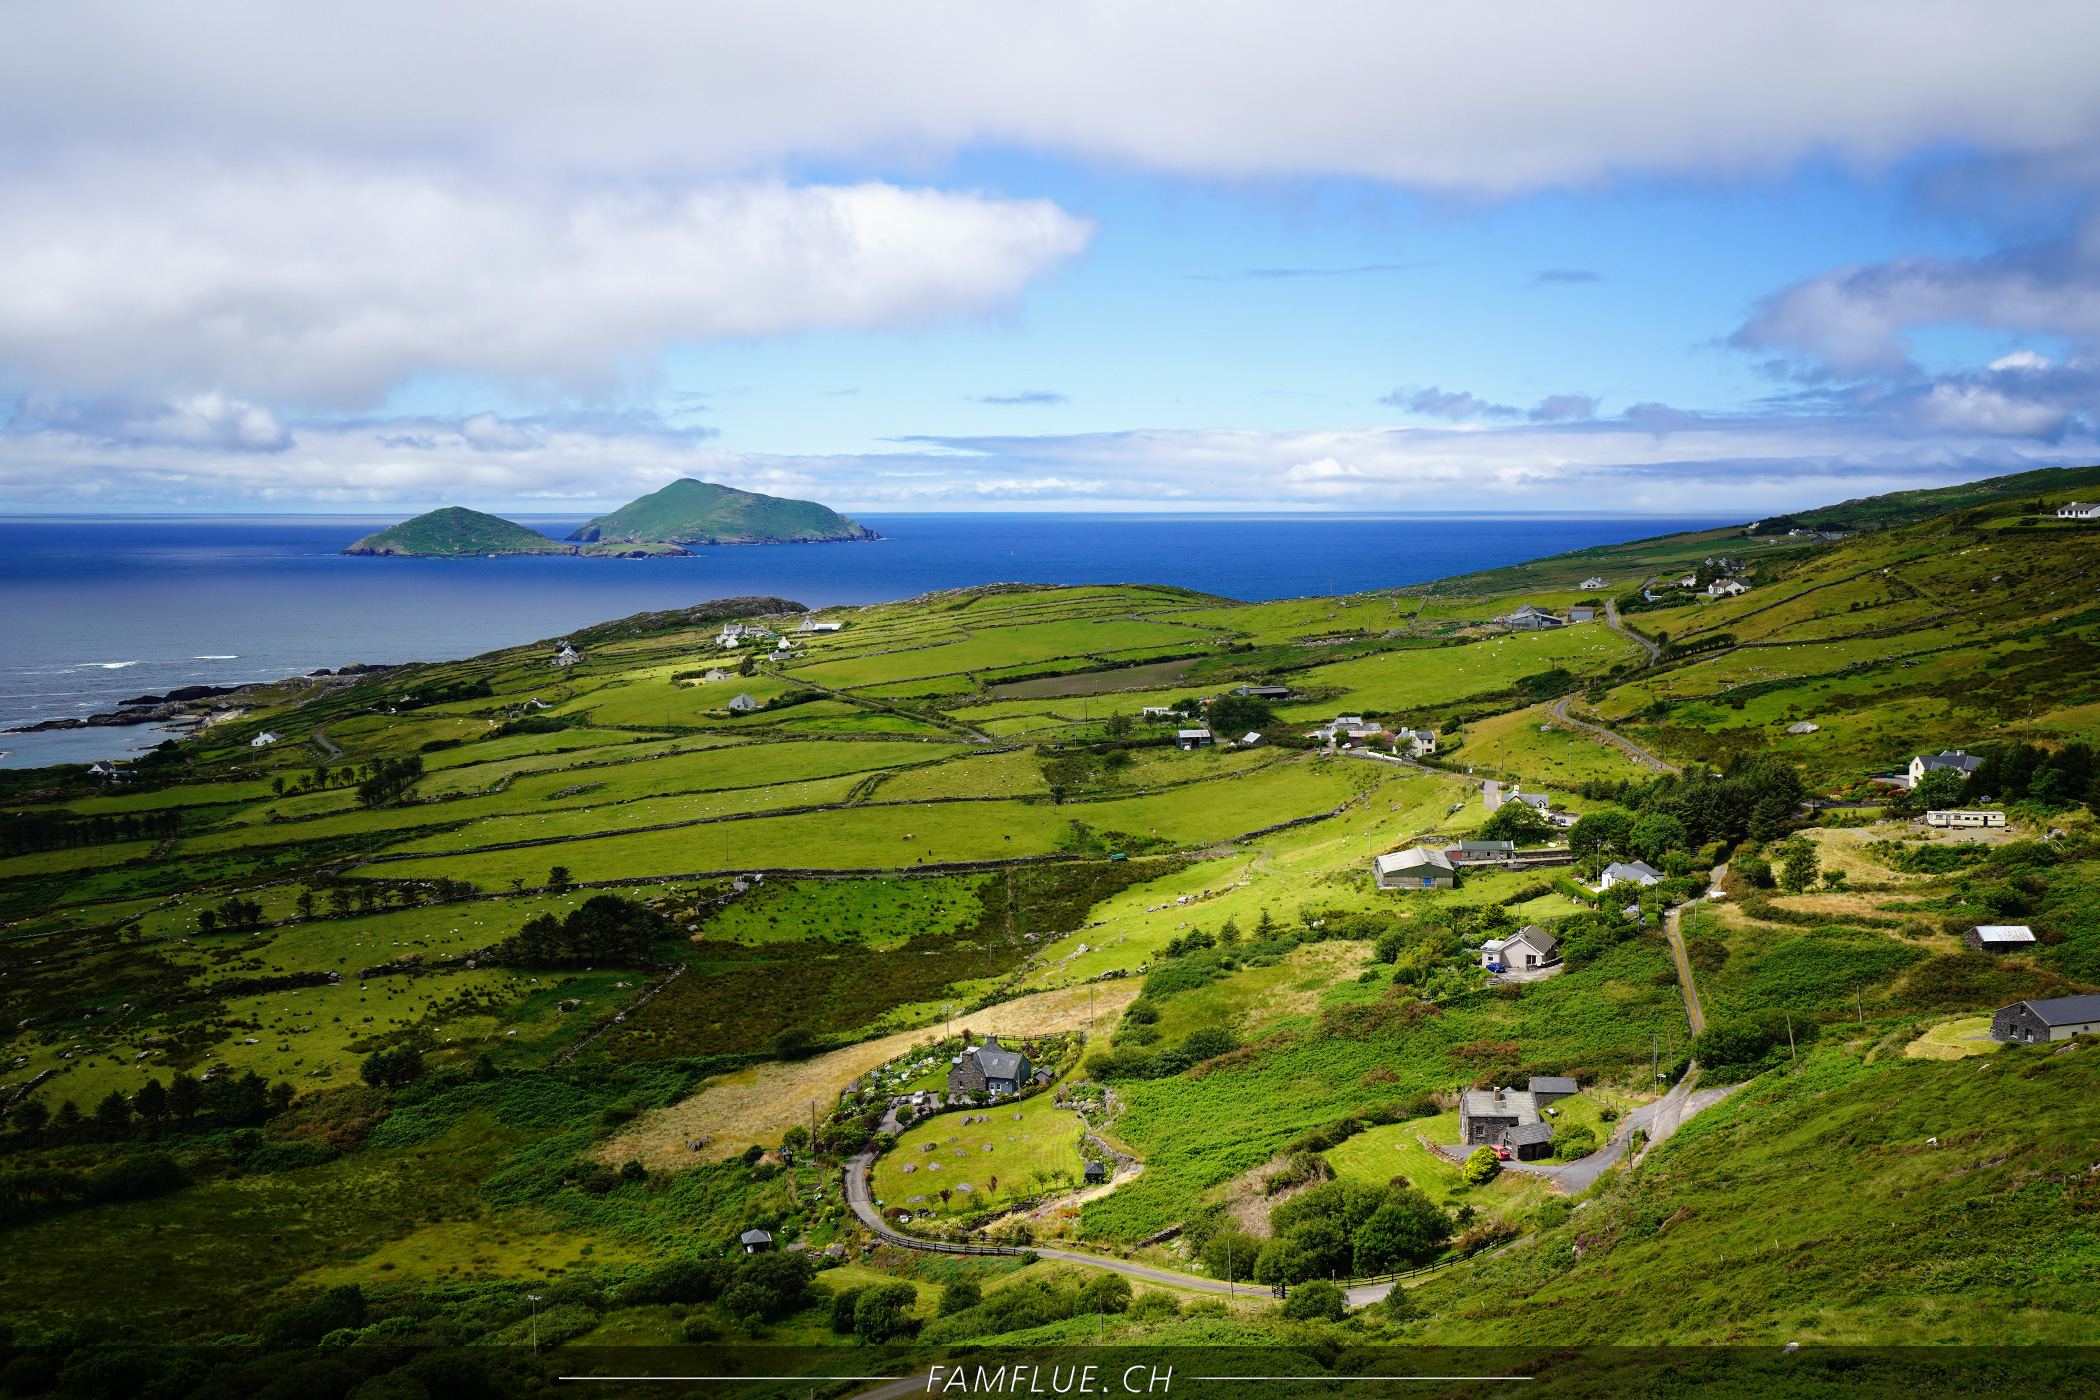 image from "View Point towards Scarriff Island"